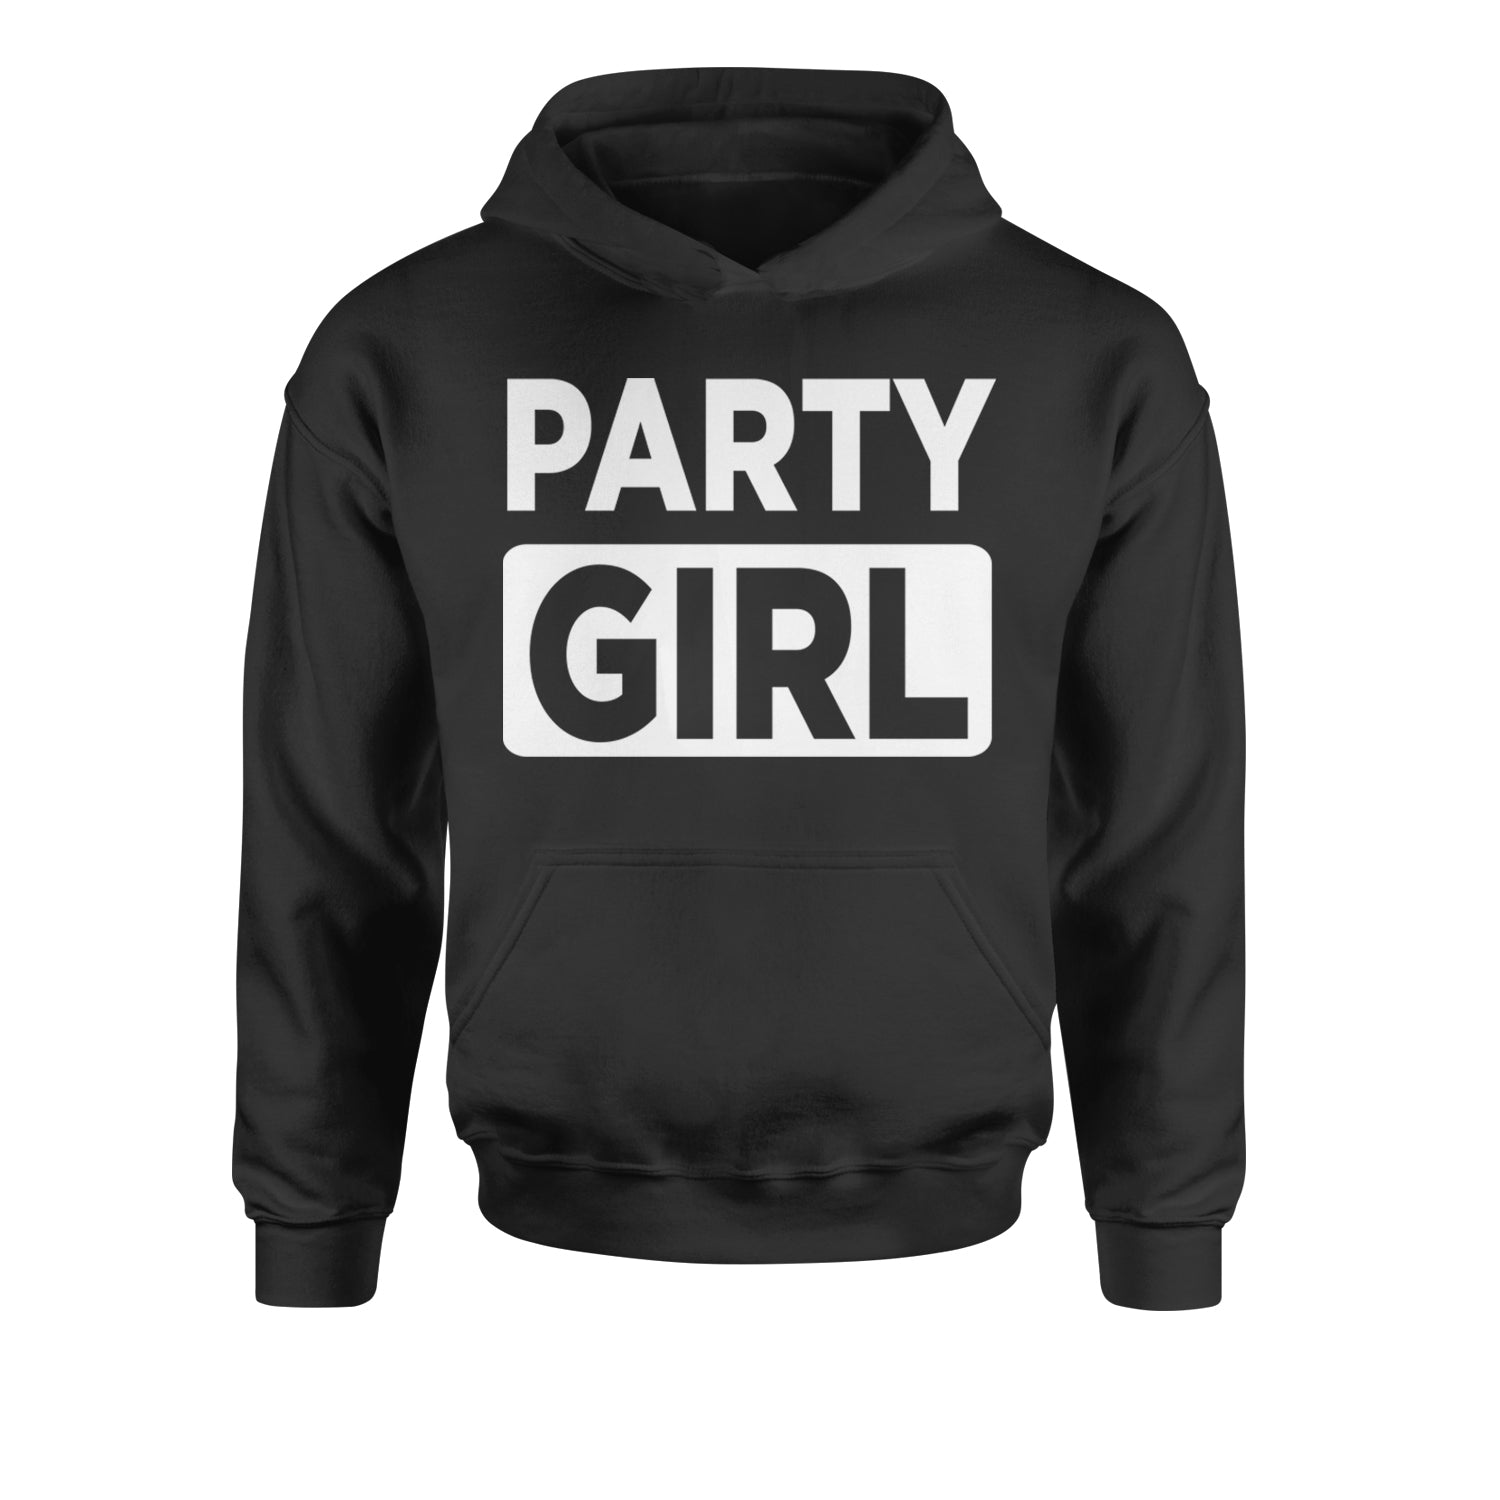 Party Girl Club Brat Youth-Sized Hoodie